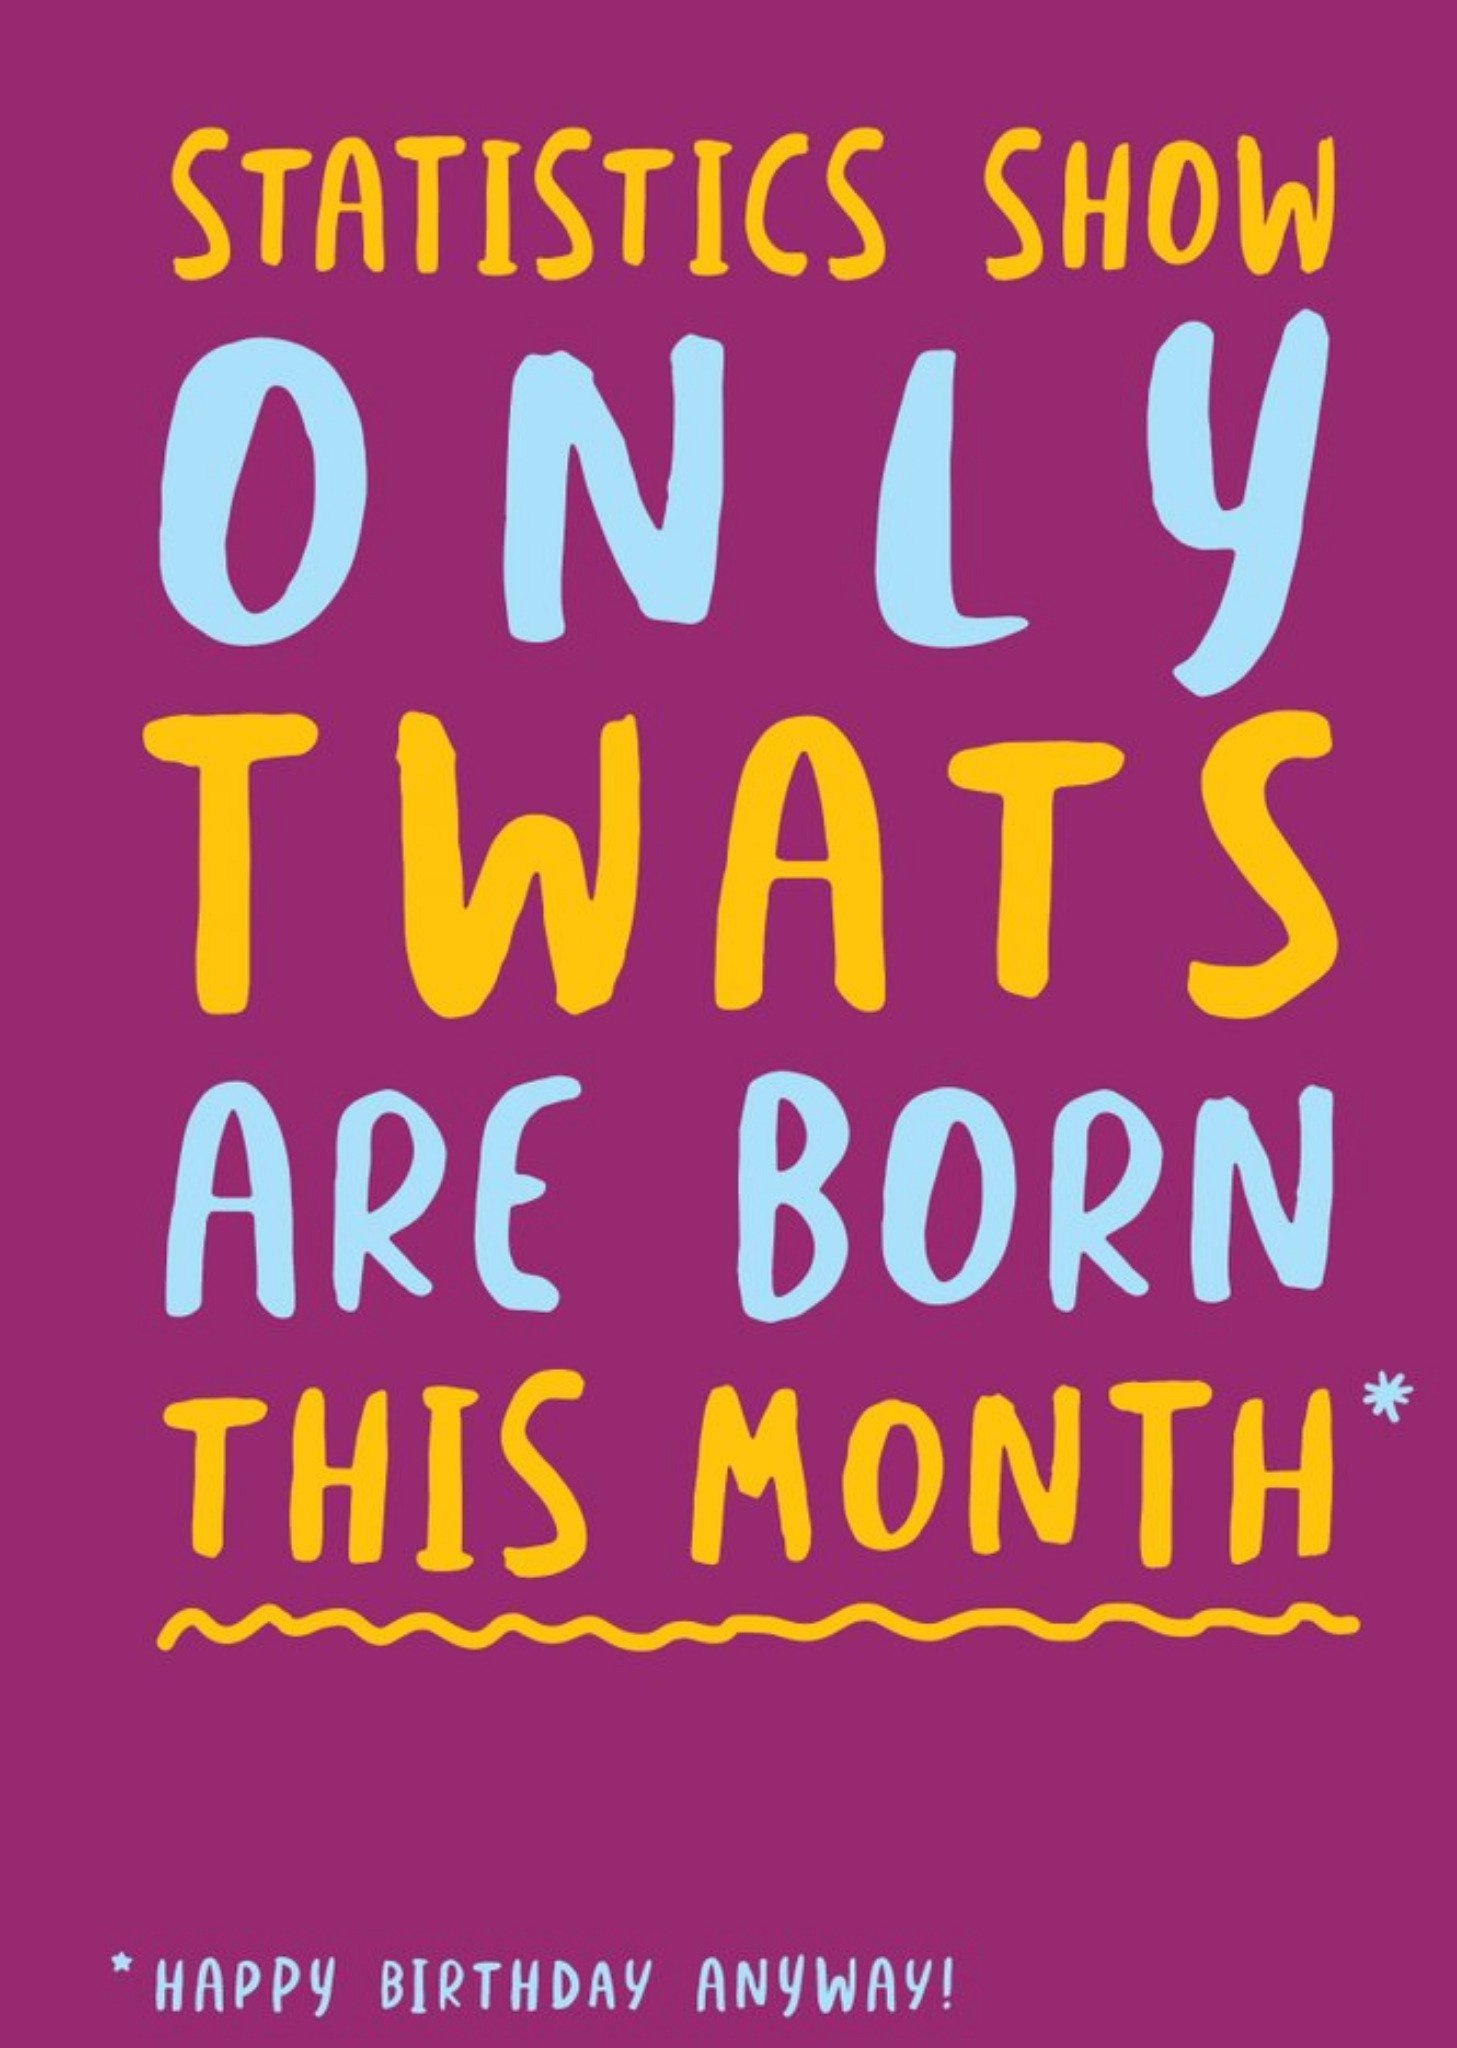 Moonpig Only Twats Are Born This Month Birthday Card Ecard